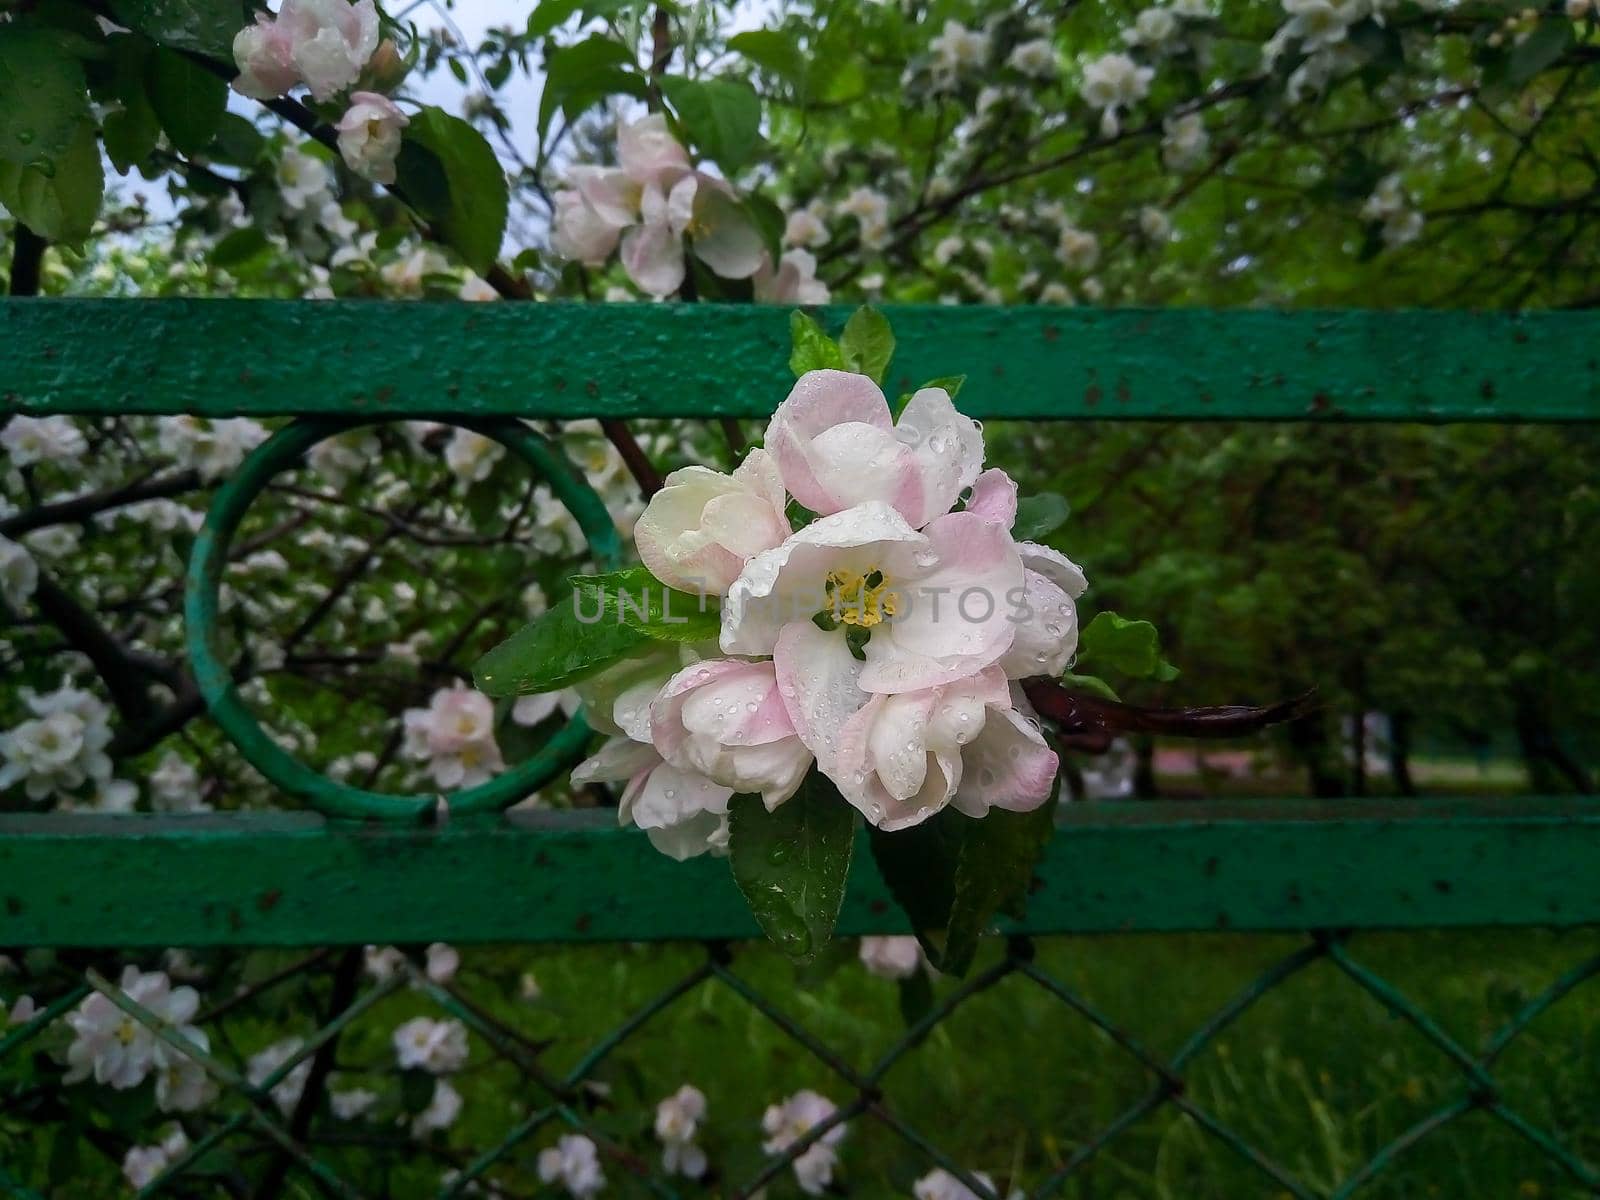 Close-up of one branch of a flowering apple tree against the background of a green iron fence. The pink and white flowers are dripping with spring raindrops.